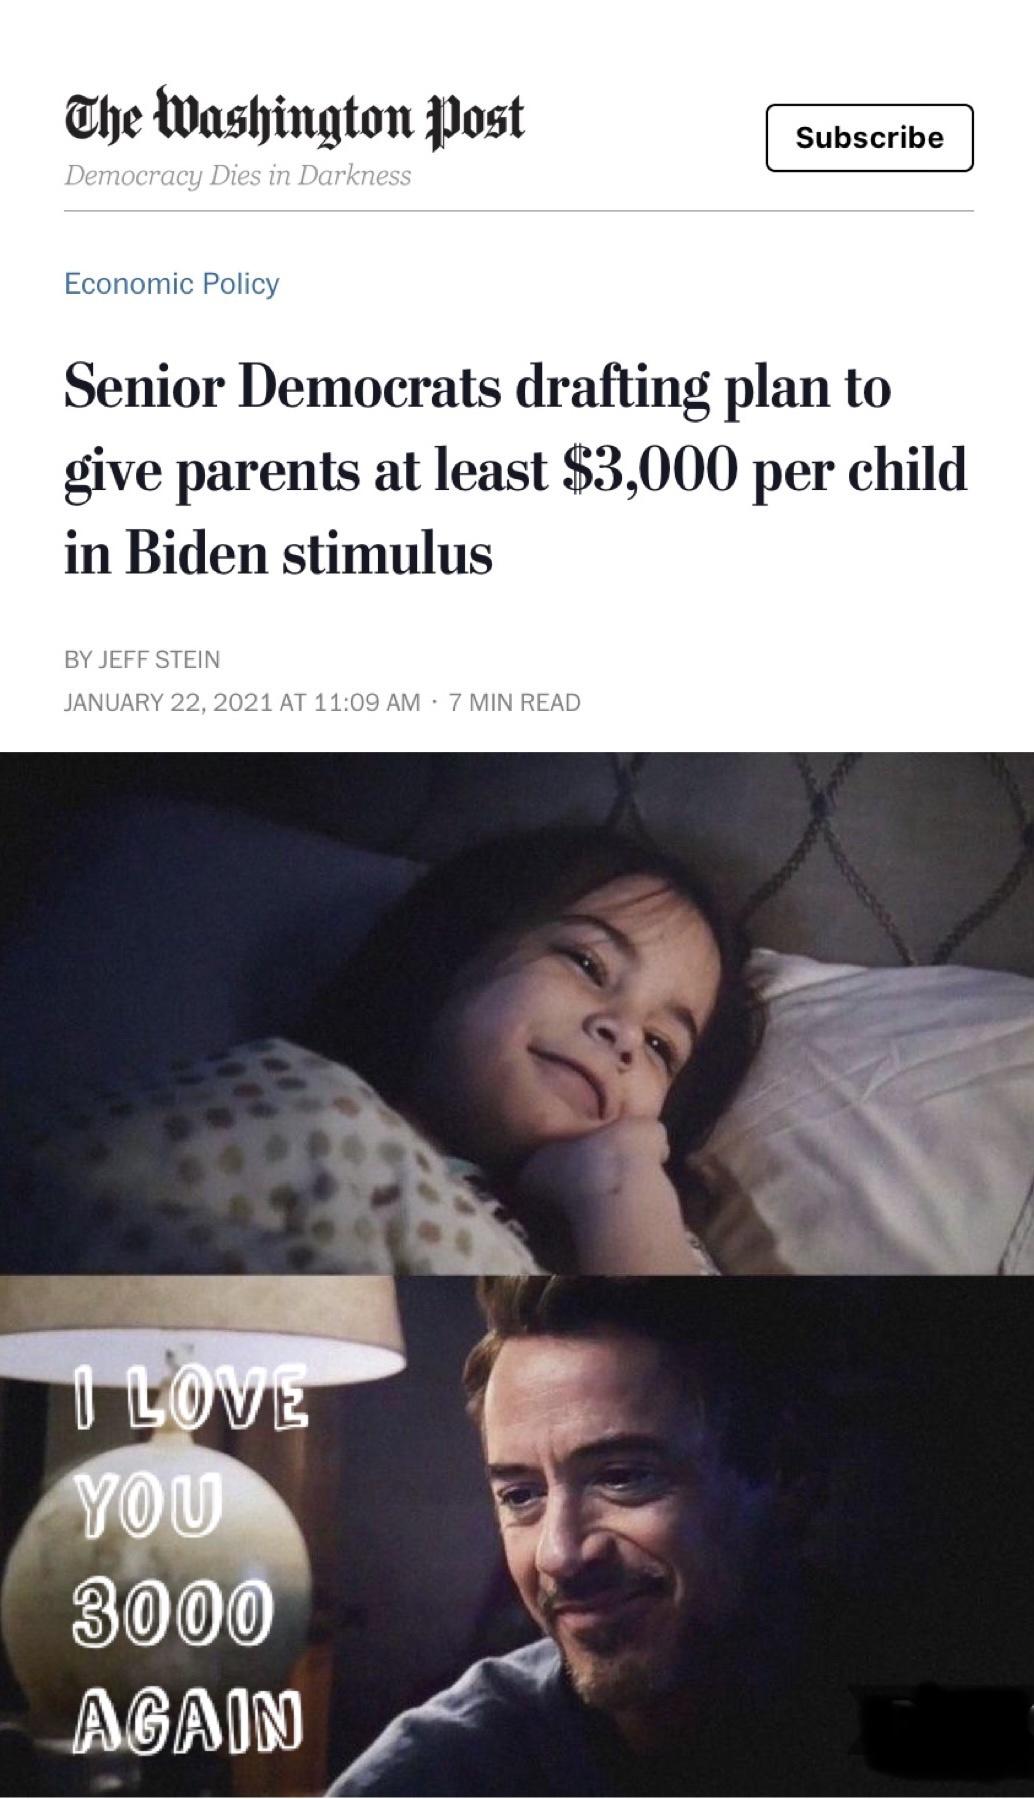 photo caption - The Washington Post Subscribe Democracy Dies in Darkness Economic Policy Senior Democrats drafting plan to give parents at least $3,000 per child in Biden stimulus By Jeff Stein At 7 Min Read I Love You 3000 Again